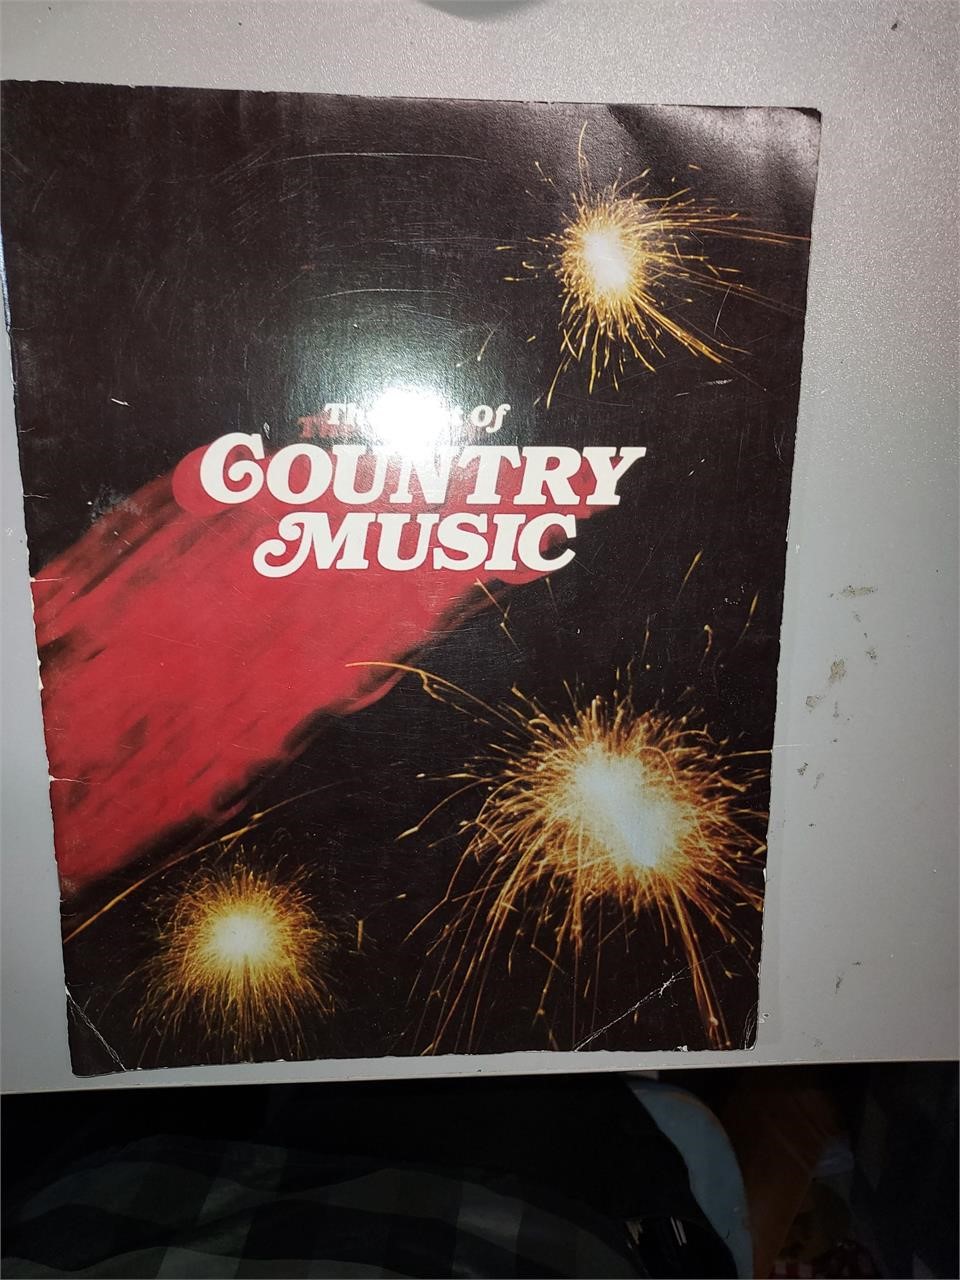 The Best Of Country Music Vintage Magazine 40 pgs